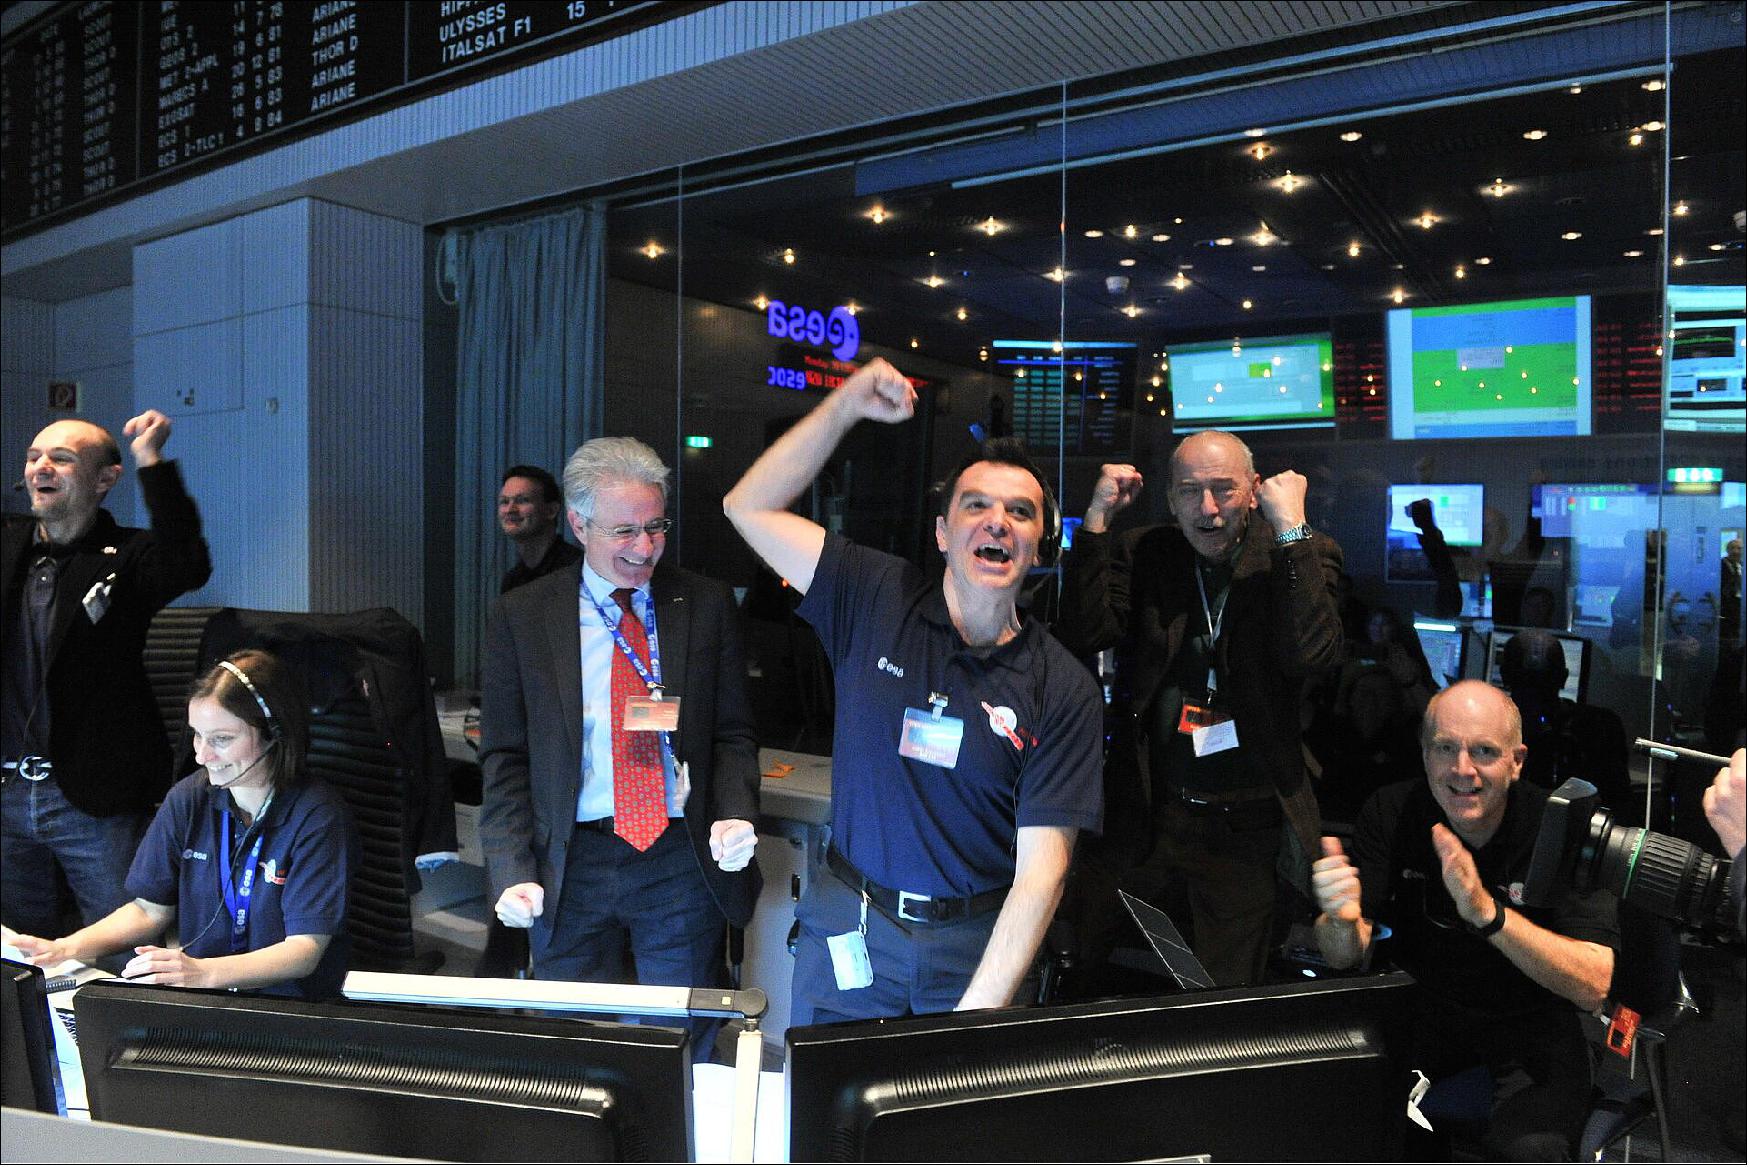 Figure 32: Rosetta Wake-up signal cheer. Mission controllers cheer the first signal received from the Rosetta spacecraft on 20 January 2014. Rosetta had woken up 807 million km away after 31 months of deep-space hibernation. At ESA’s Operations Centre in Darmstadt, Germany, mission controllers, ESA staff and press waited for the first sign of Rosetta’s revival. - Rosetta is chasing Comet 67P/Churyumov–Gerasimenko, where it will become the first mission to rendezvous with a comet, the first to land on a comet and the first to follow a comet around the Sun (image credit: ESA, Jürgen Mai)